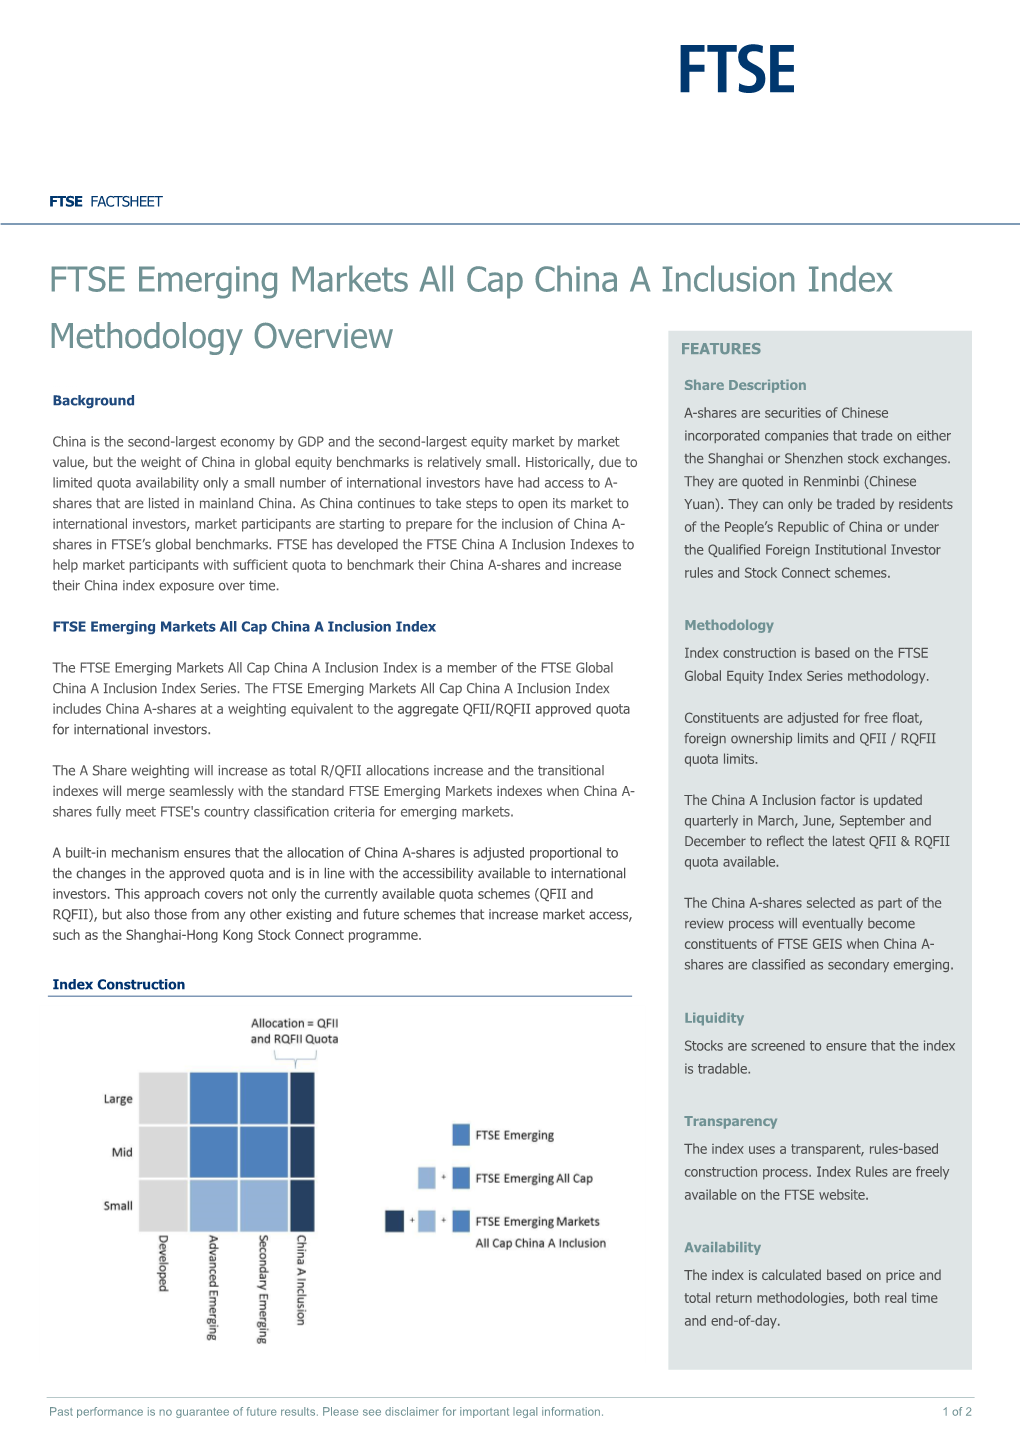 FTSE Emerging Markets All Cap China a Inclusion Index